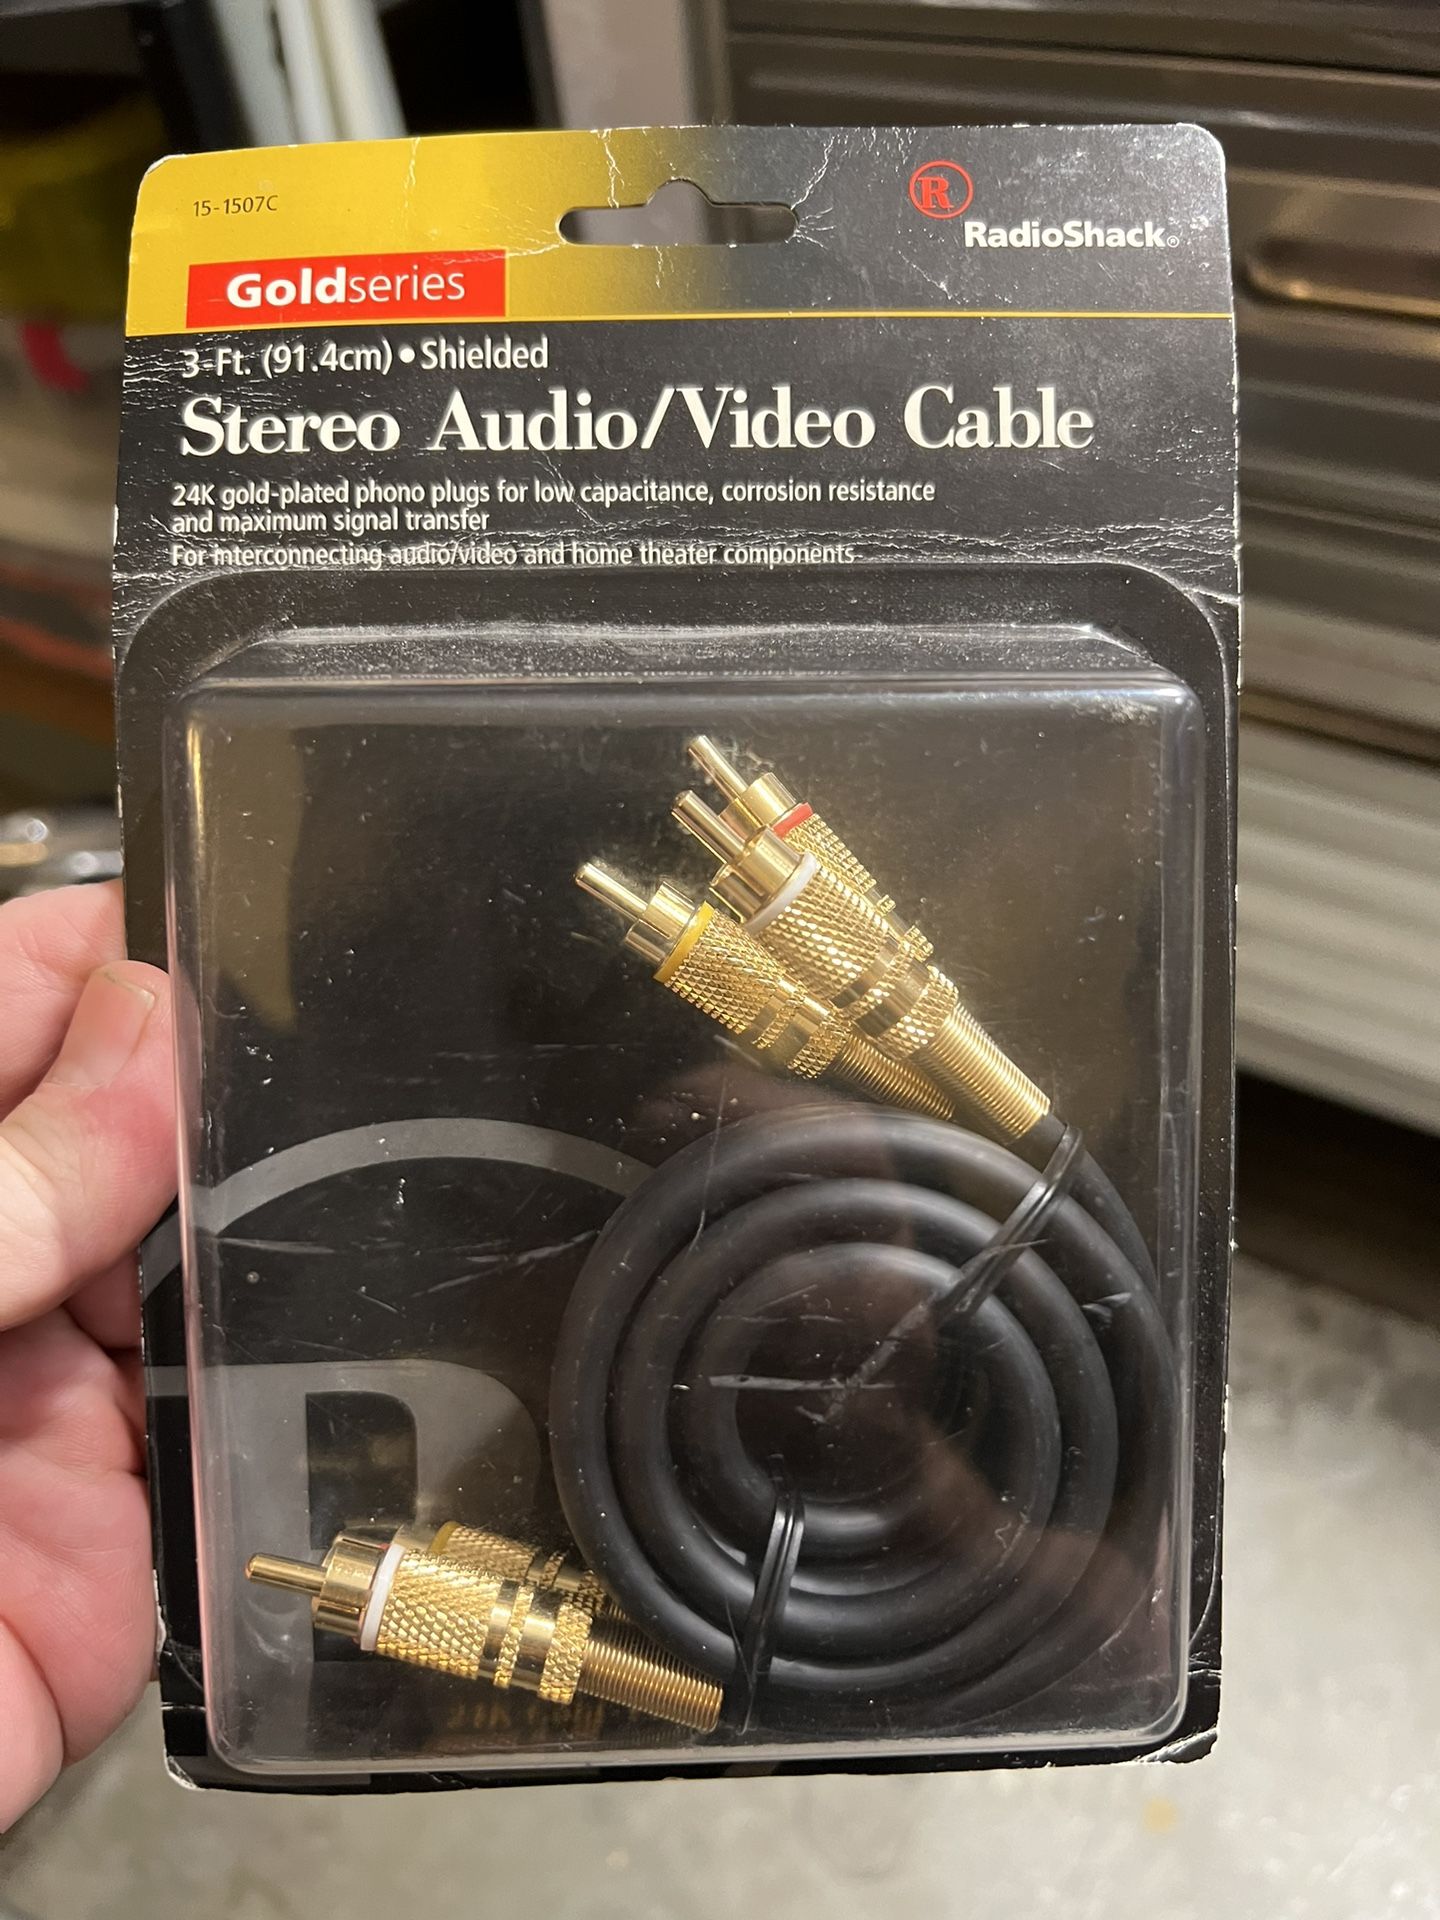 Audio/video Cables New In Original Packaging.